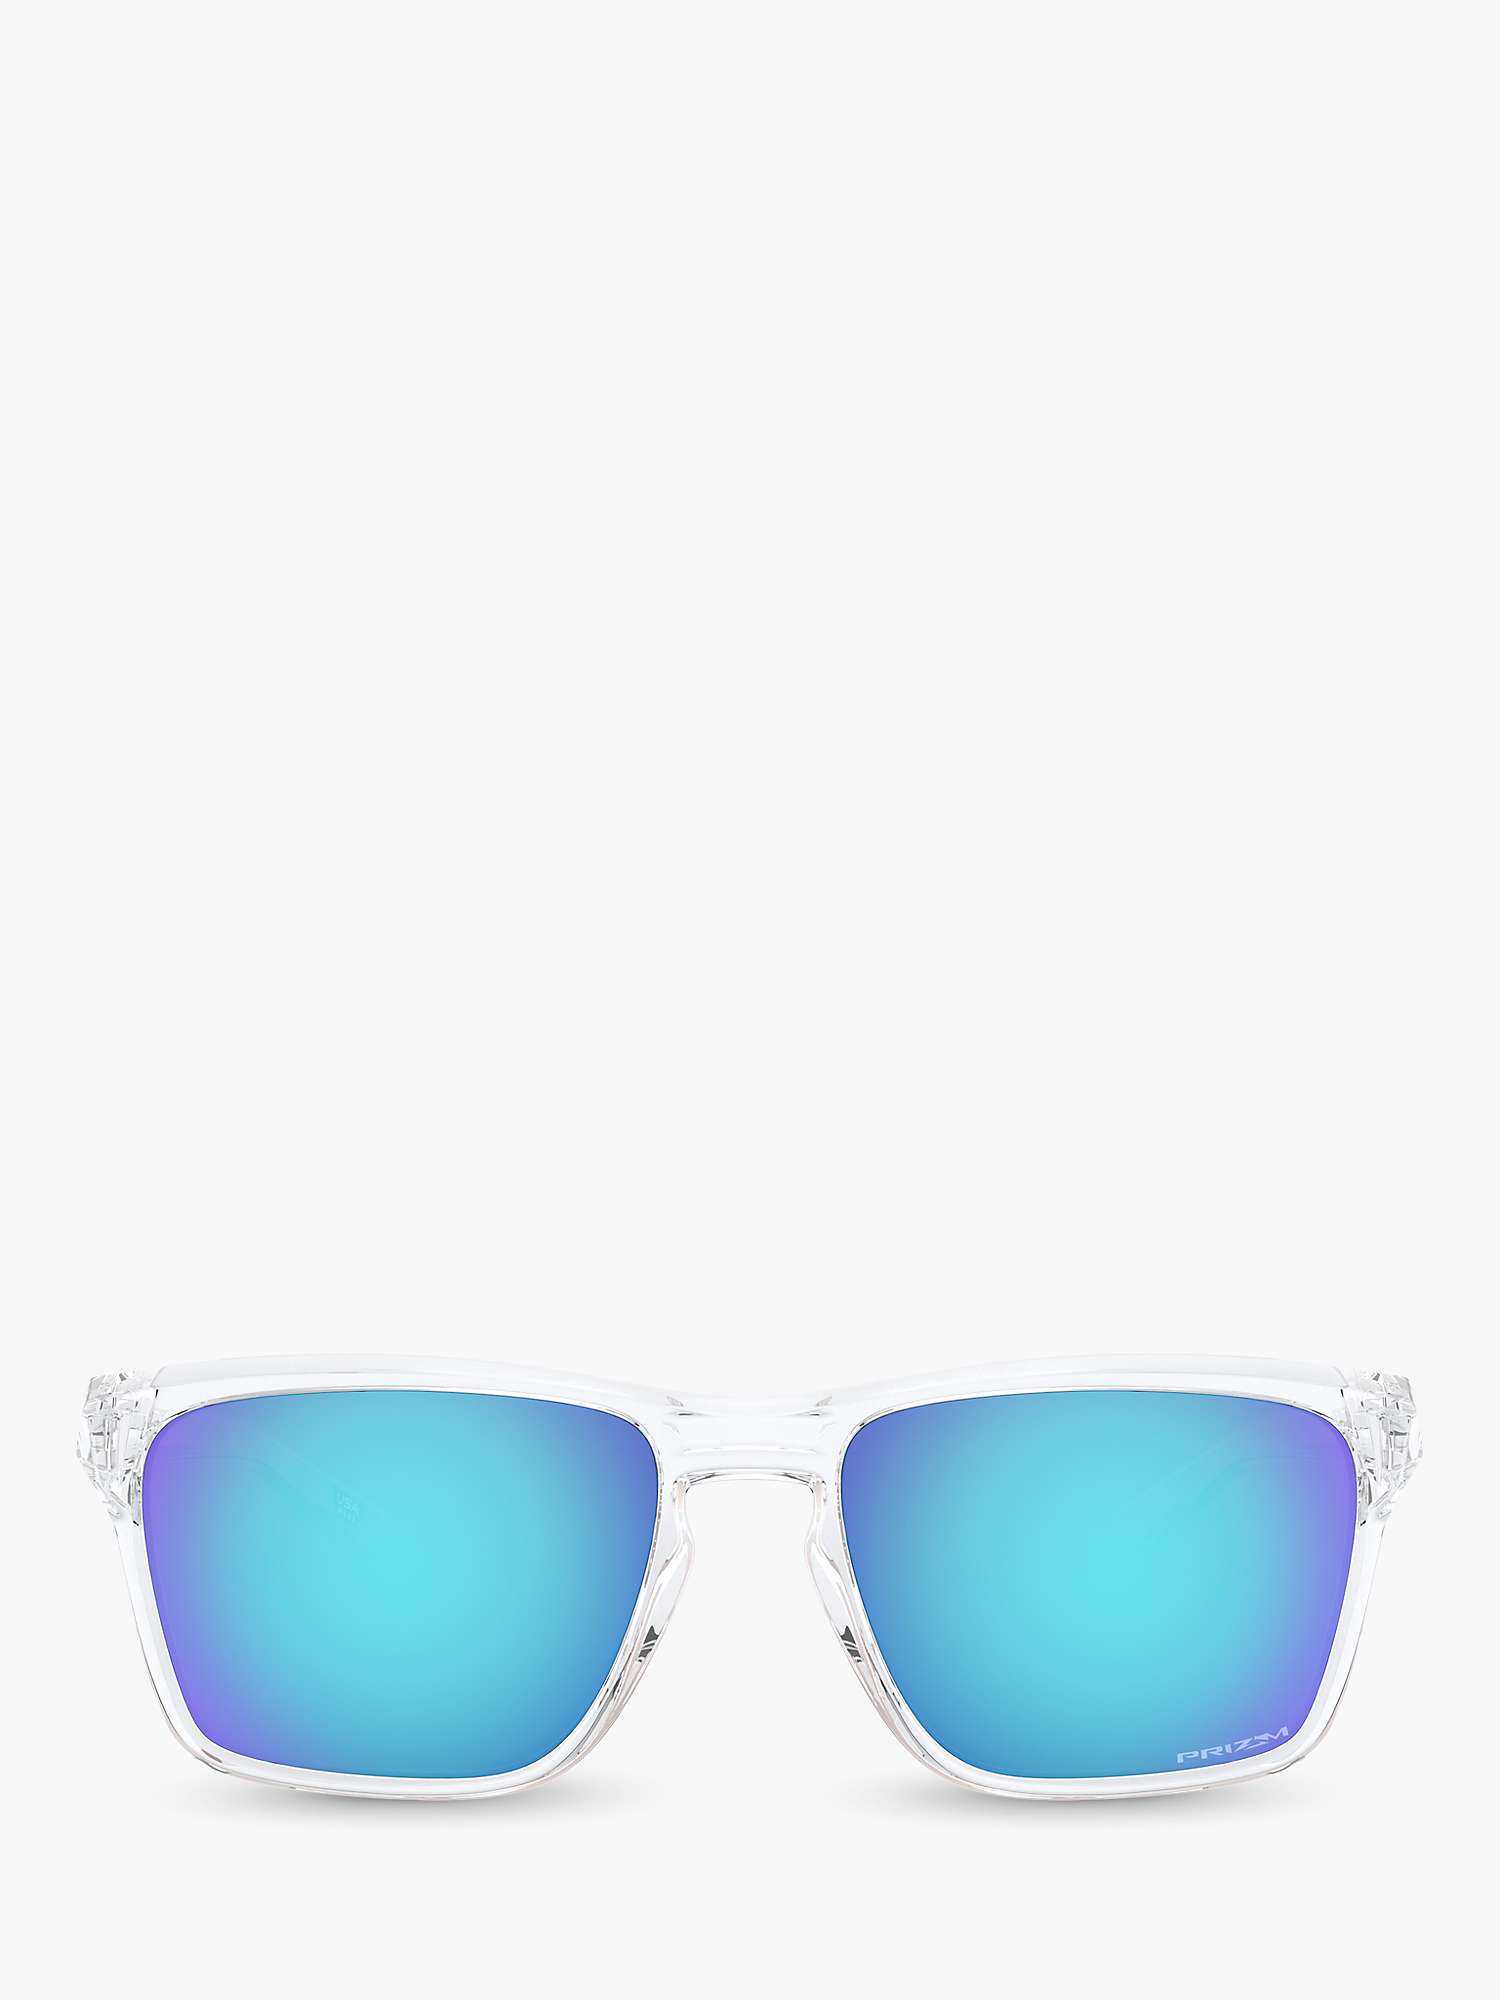 Buy Oakley OO9448 Men's Sylas Rectangular Sunglasses, Polished Clear/Mirror Blue Online at johnlewis.com